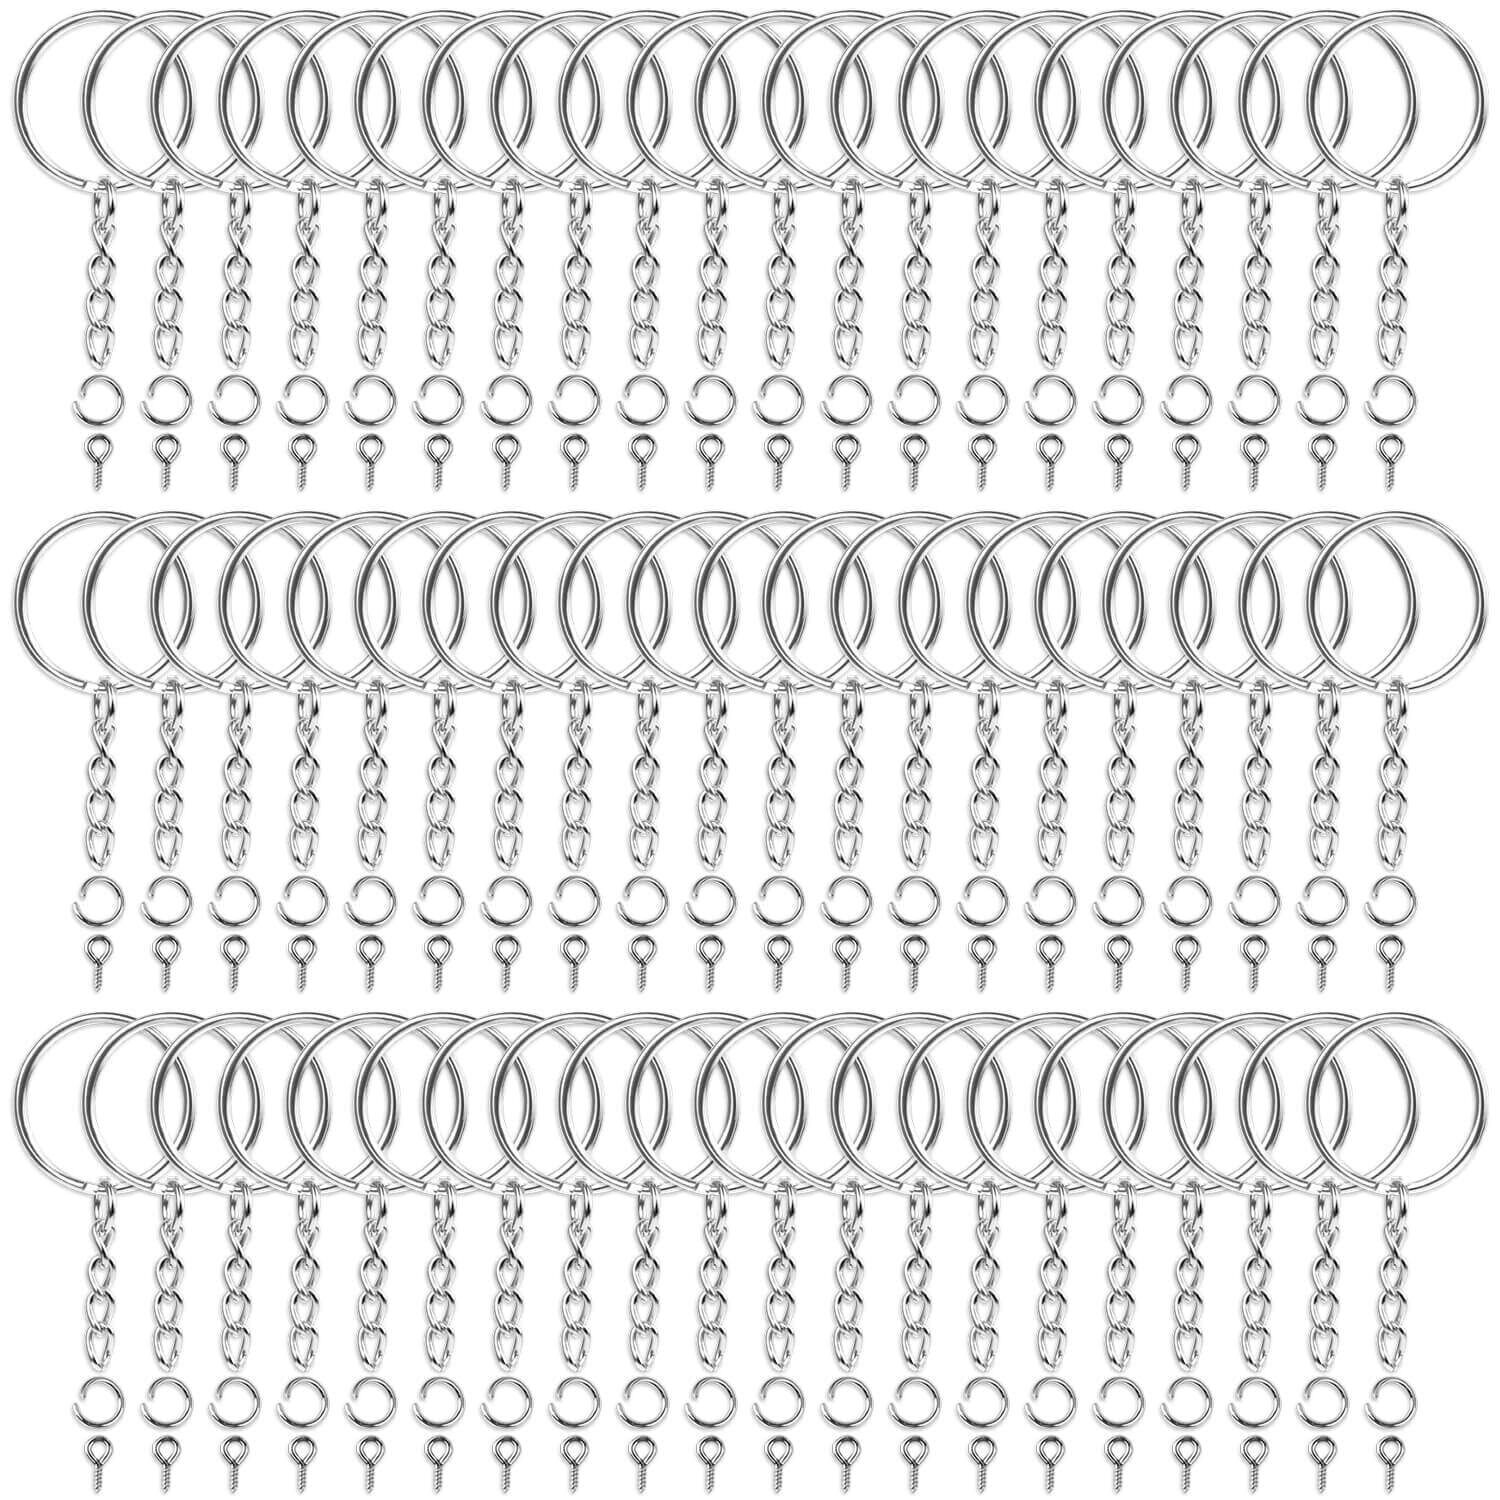 120 Pcs Keychain Rings Kit with Chain and Jump Rings for DIY Crafts Keychain